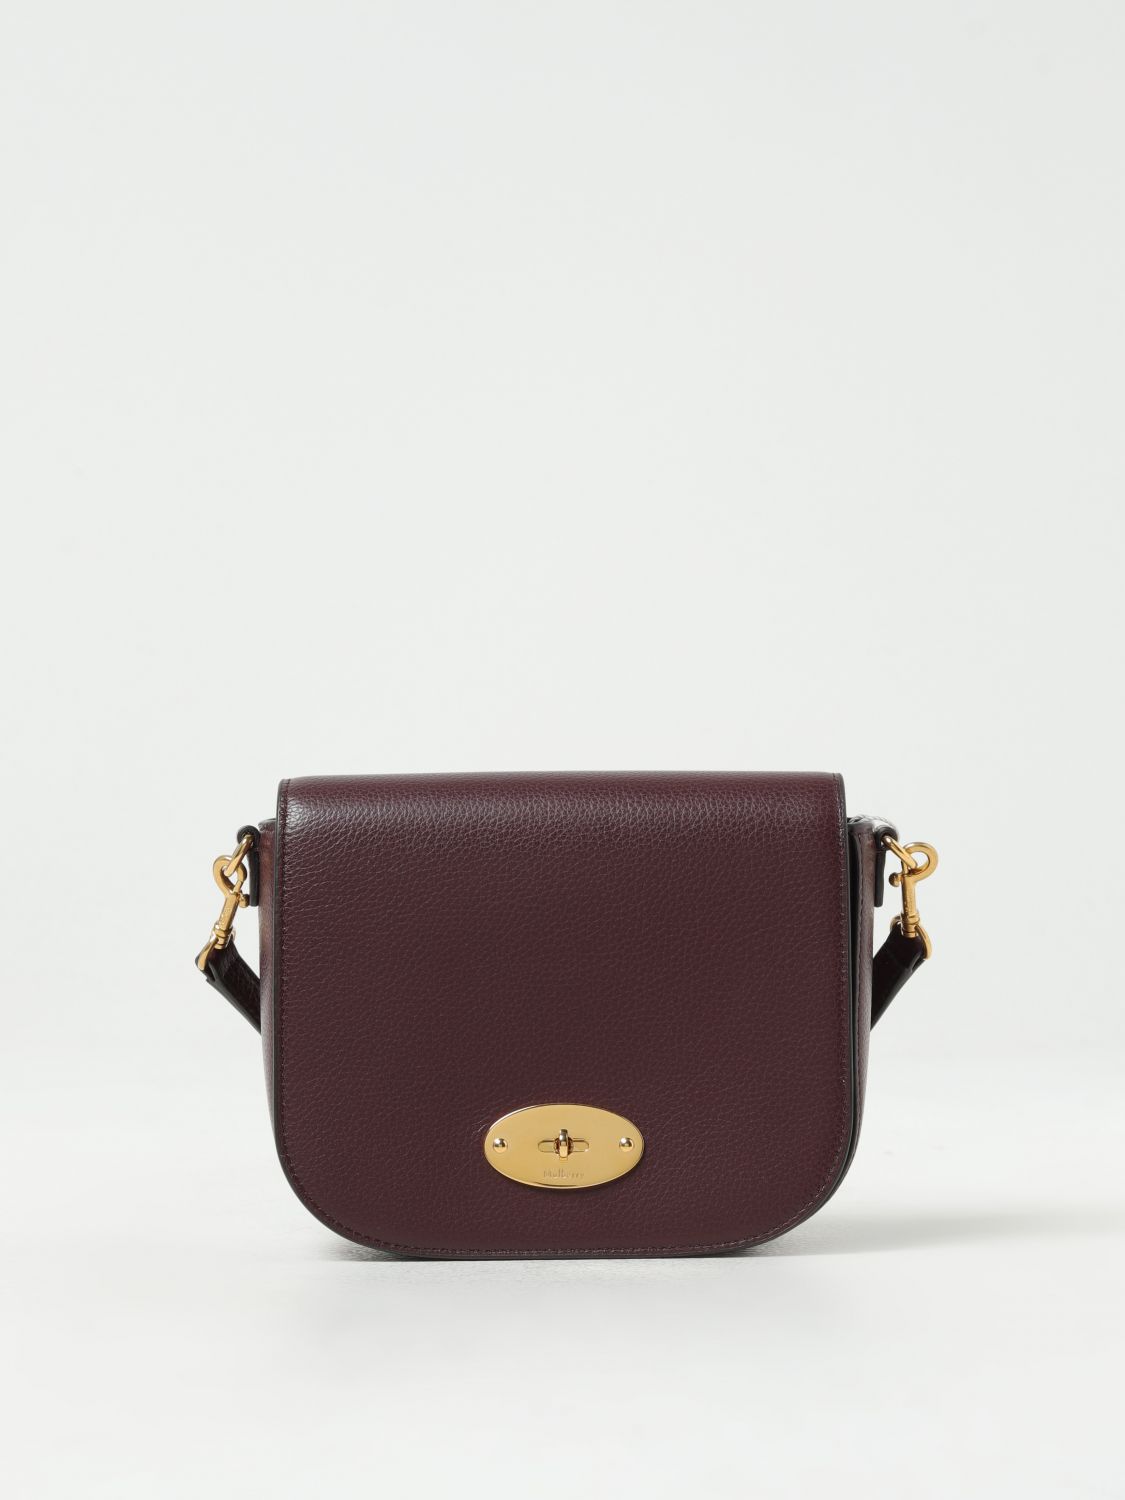 Women's Grained Leather Small Darley Satchel Bag by Mulberry | Coltorti  Boutique